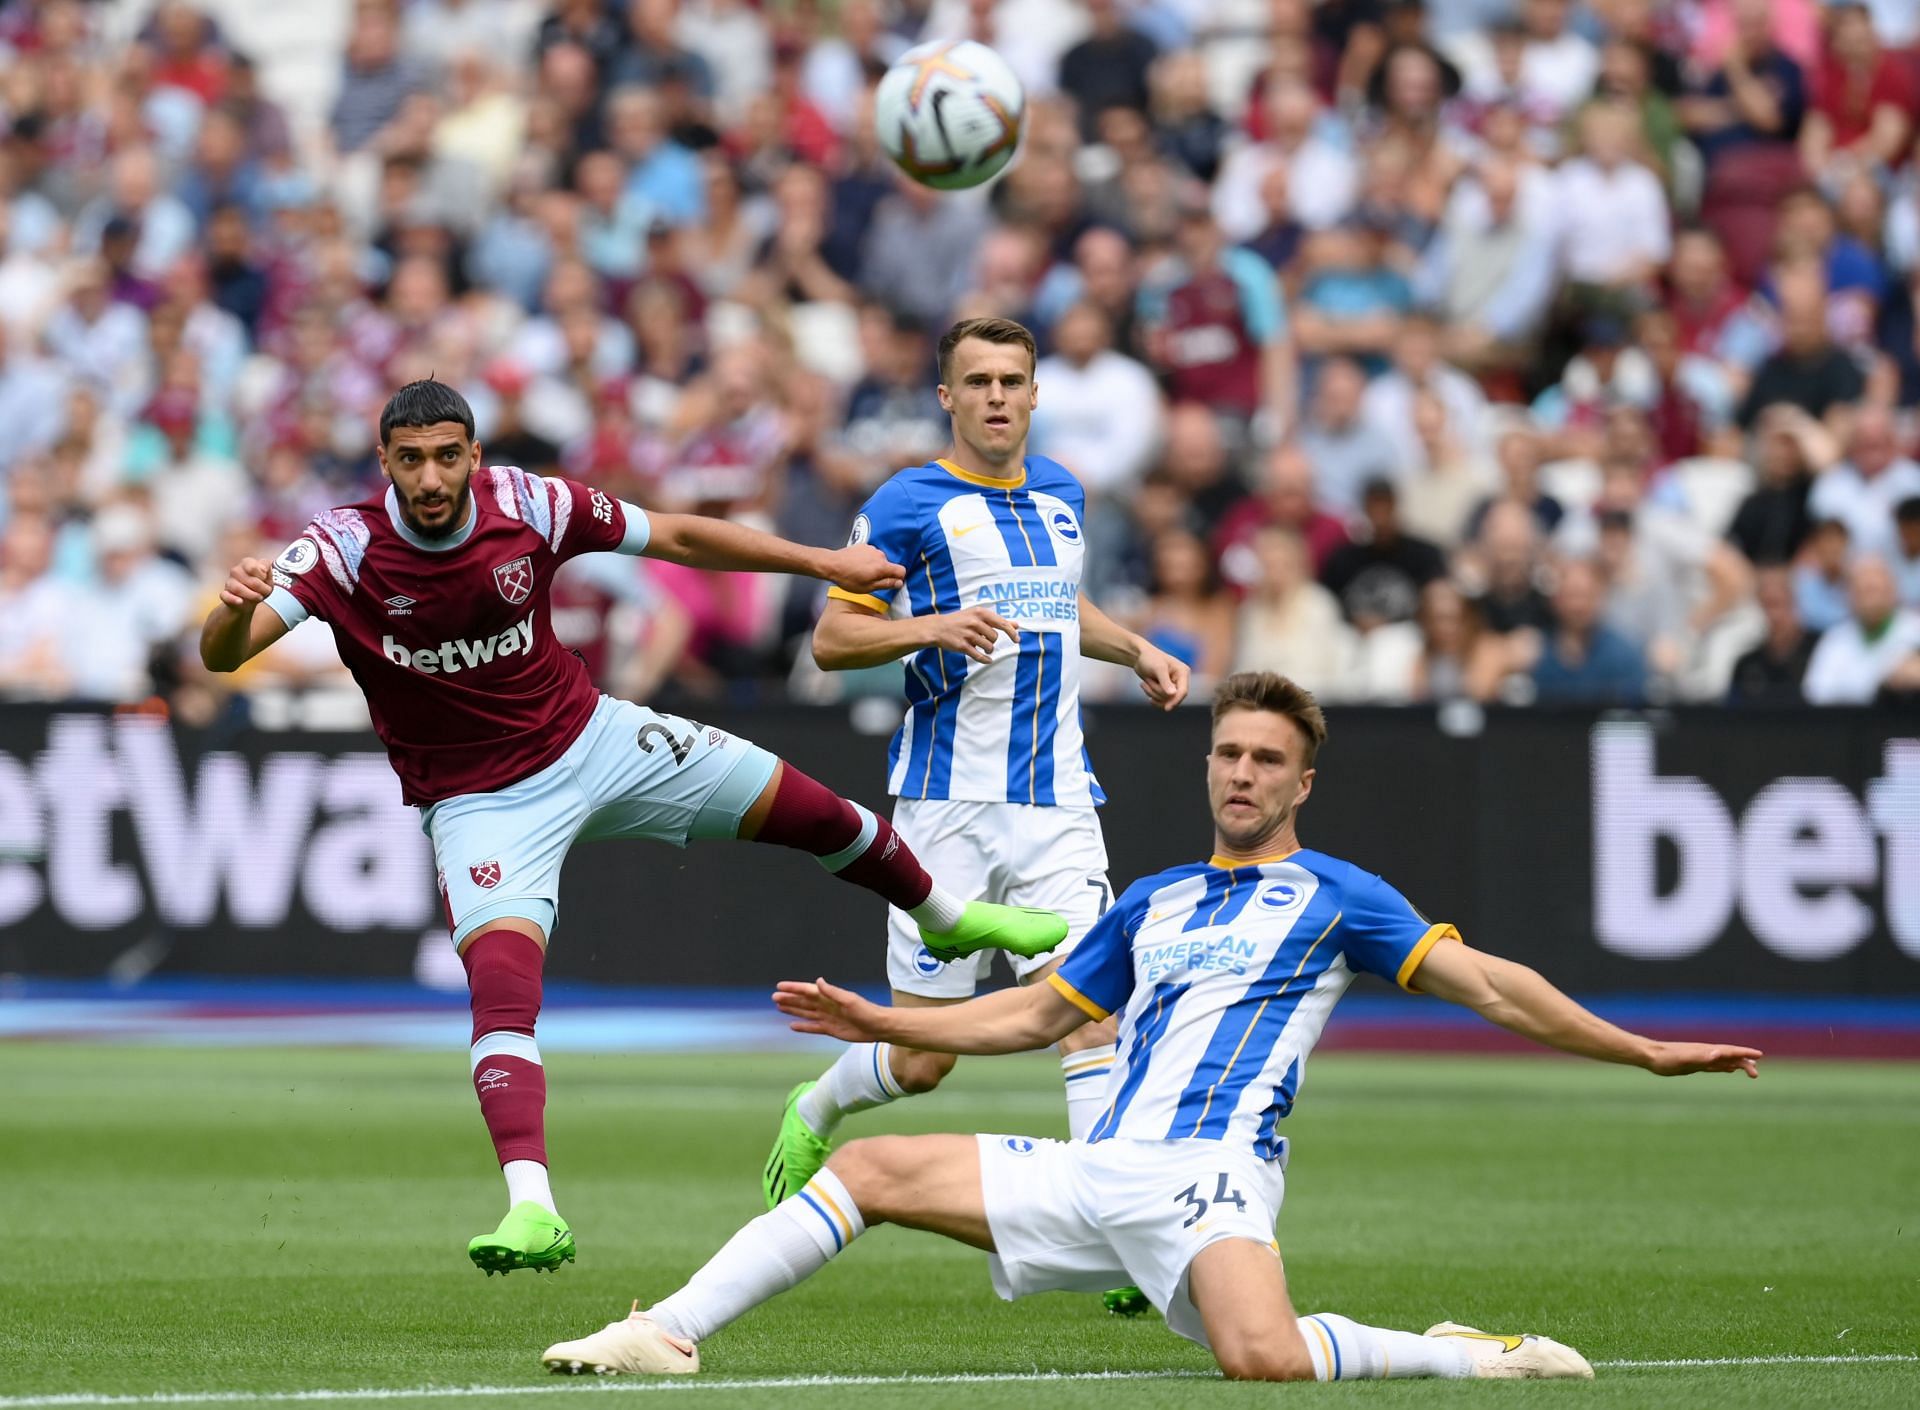 West Ham ends Brighton's perfect record in EPL